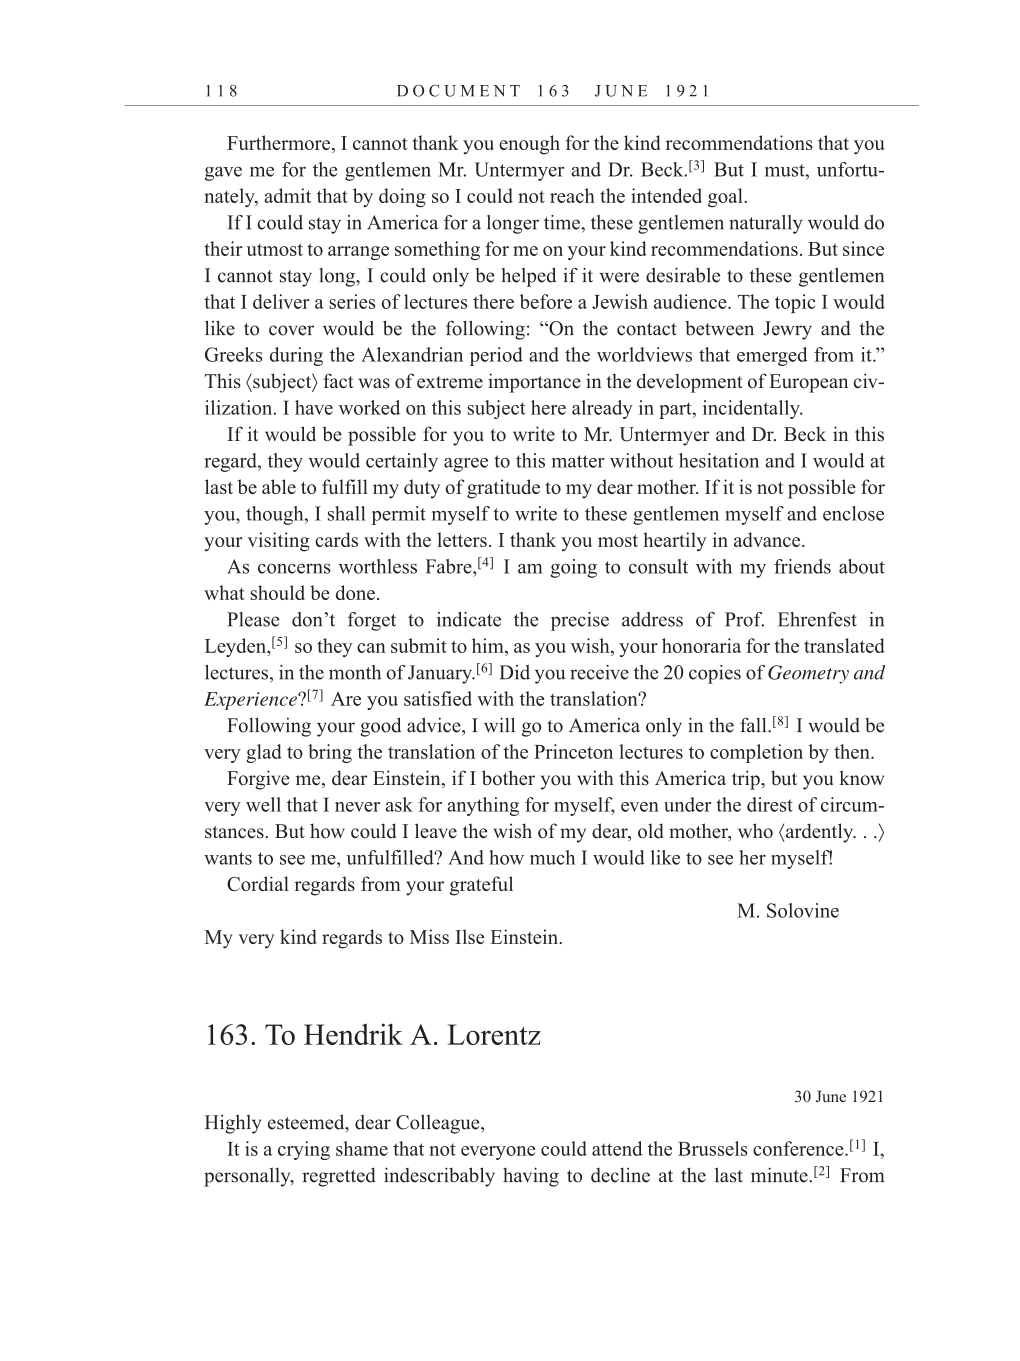 Volume 12: The Berlin Years: Correspondence, January-December 1921 (English translation supplement) page 118